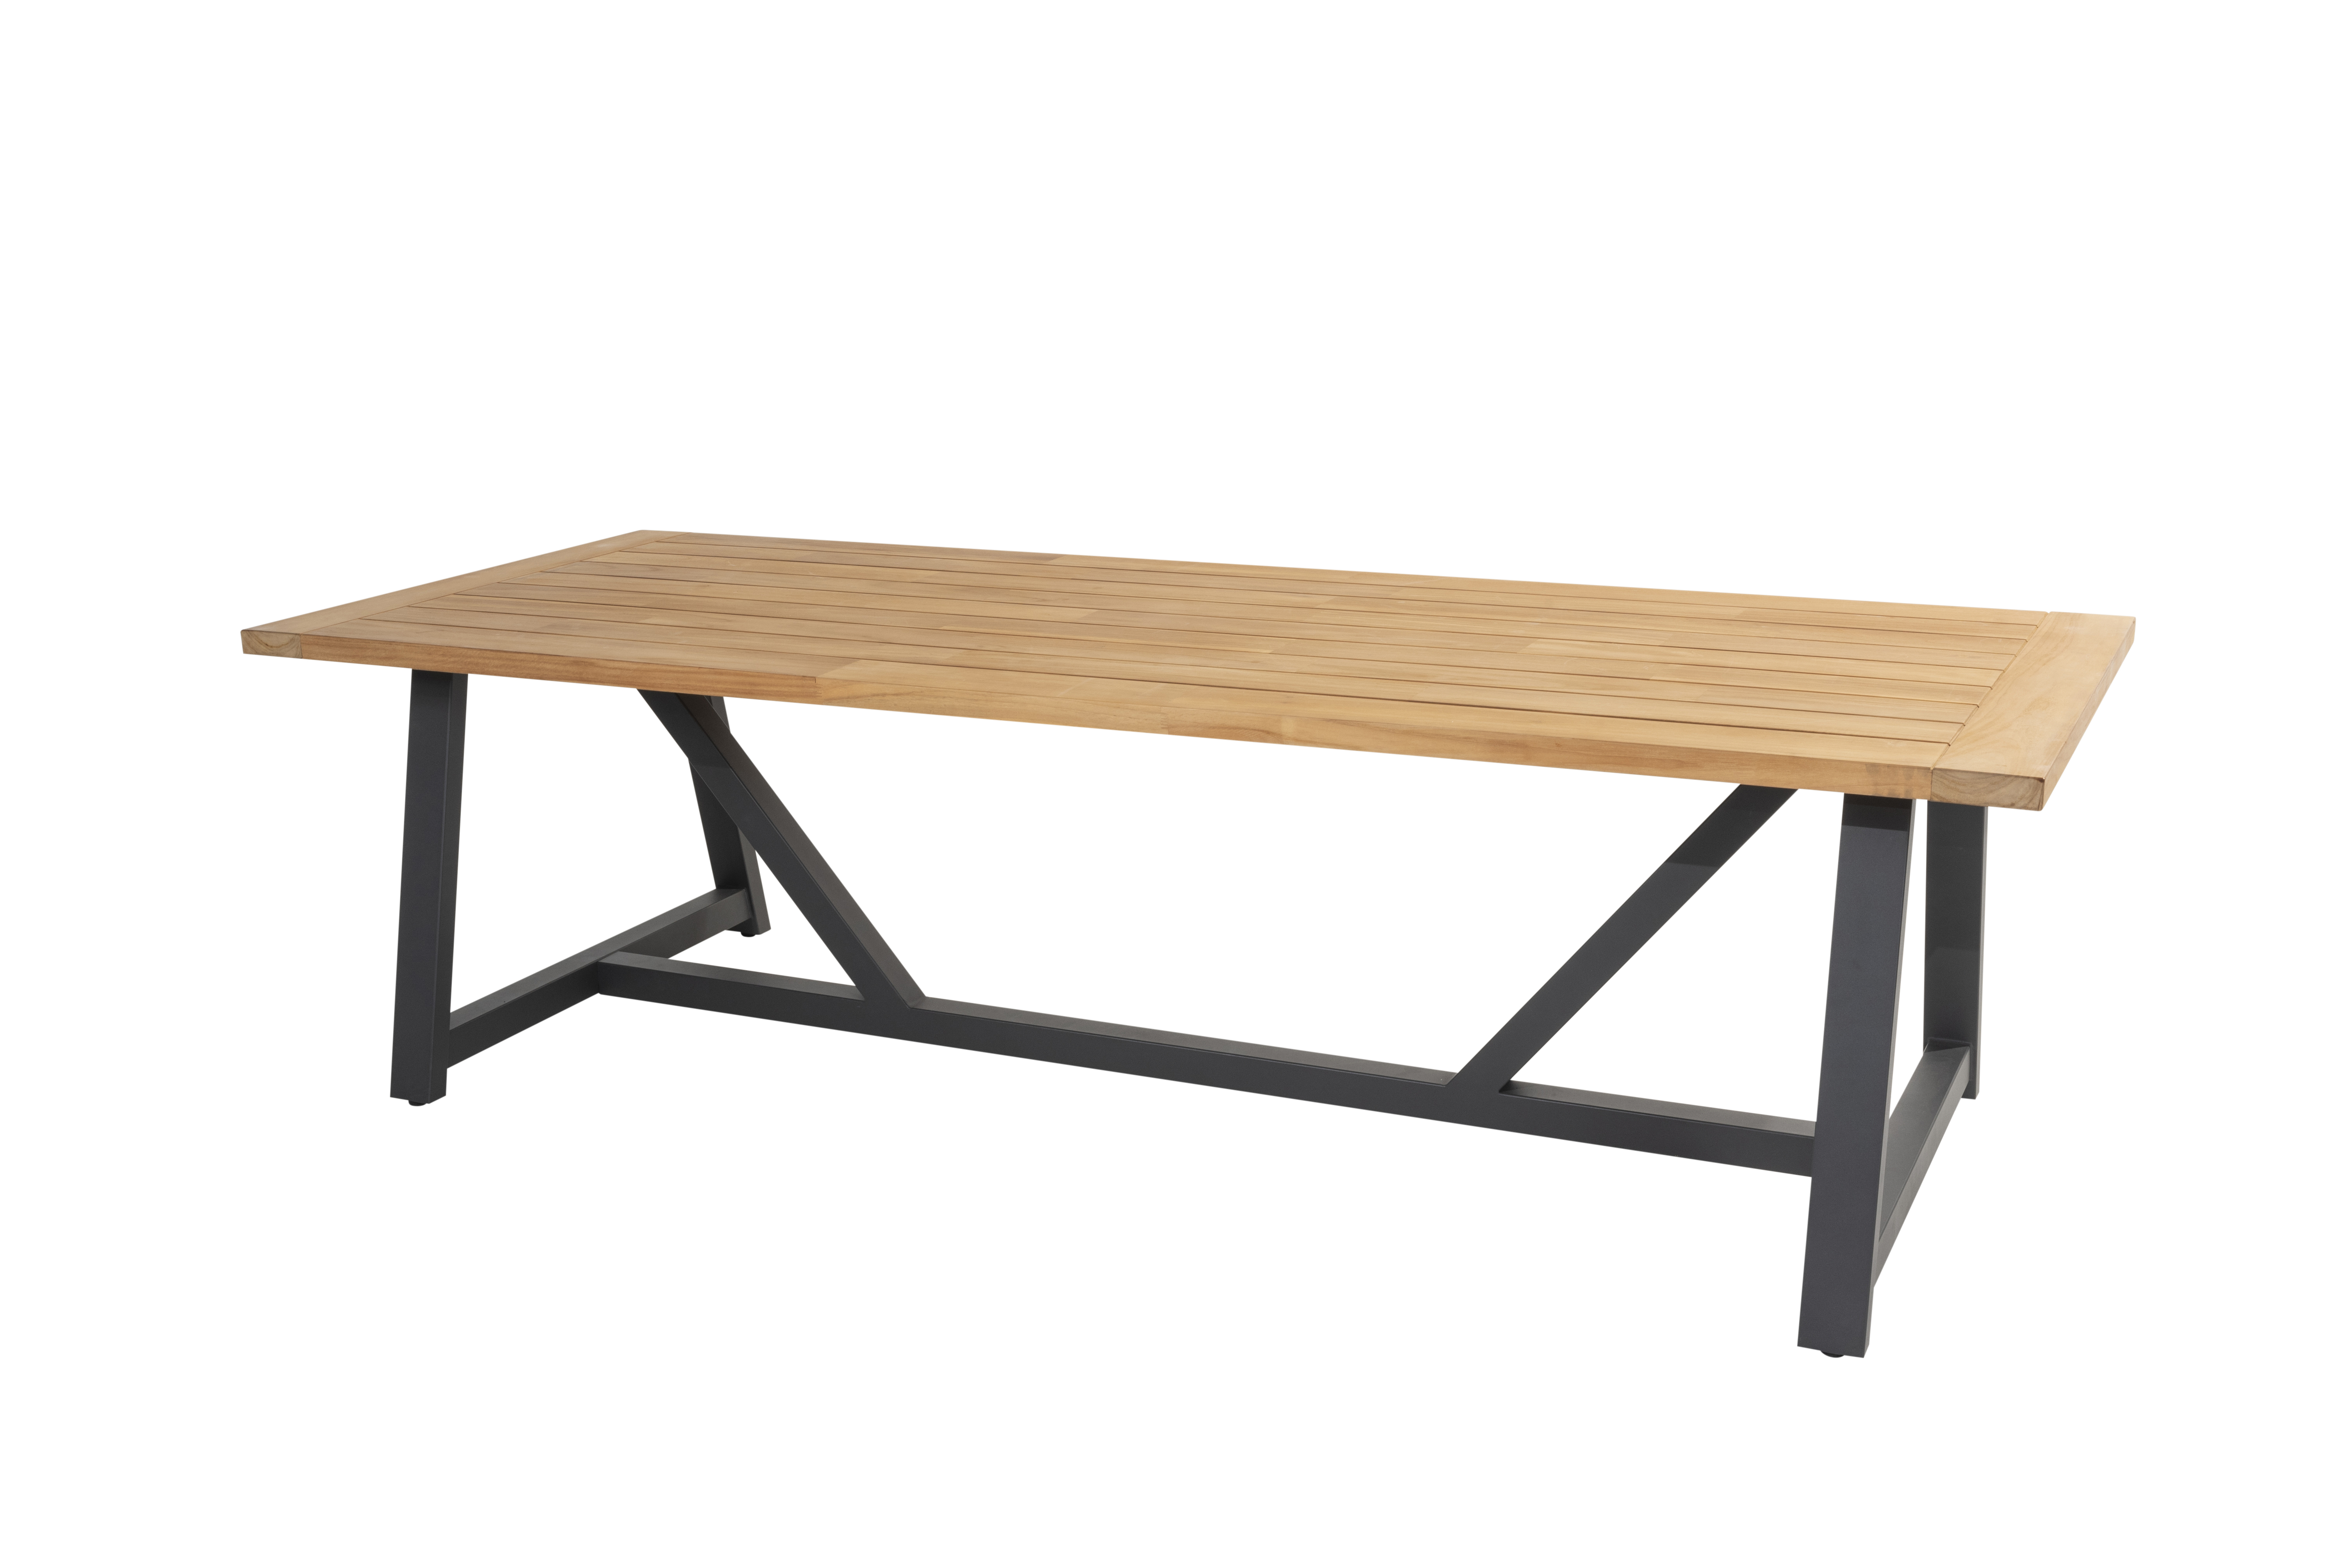 Noah dining base Anthracite for 260x100x75 + Noah dining table top natural teak 260x100